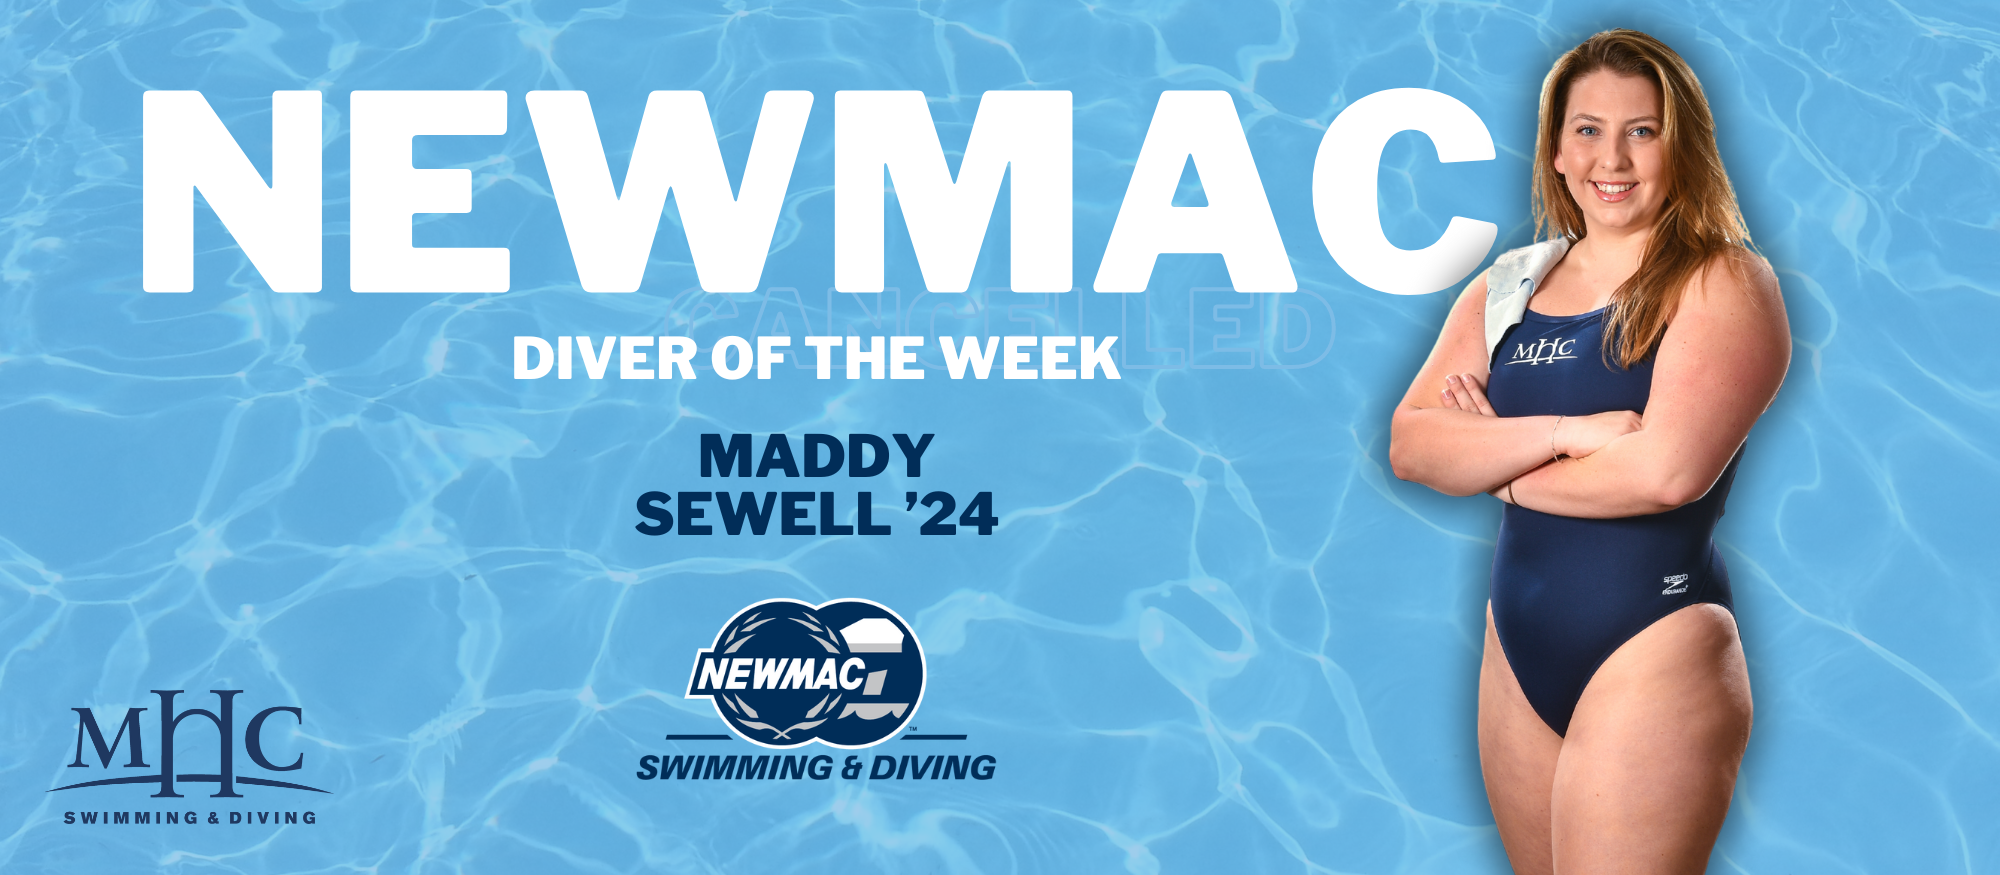 Maddy Sewell wins her third career NEWMAC Diver of the Week award